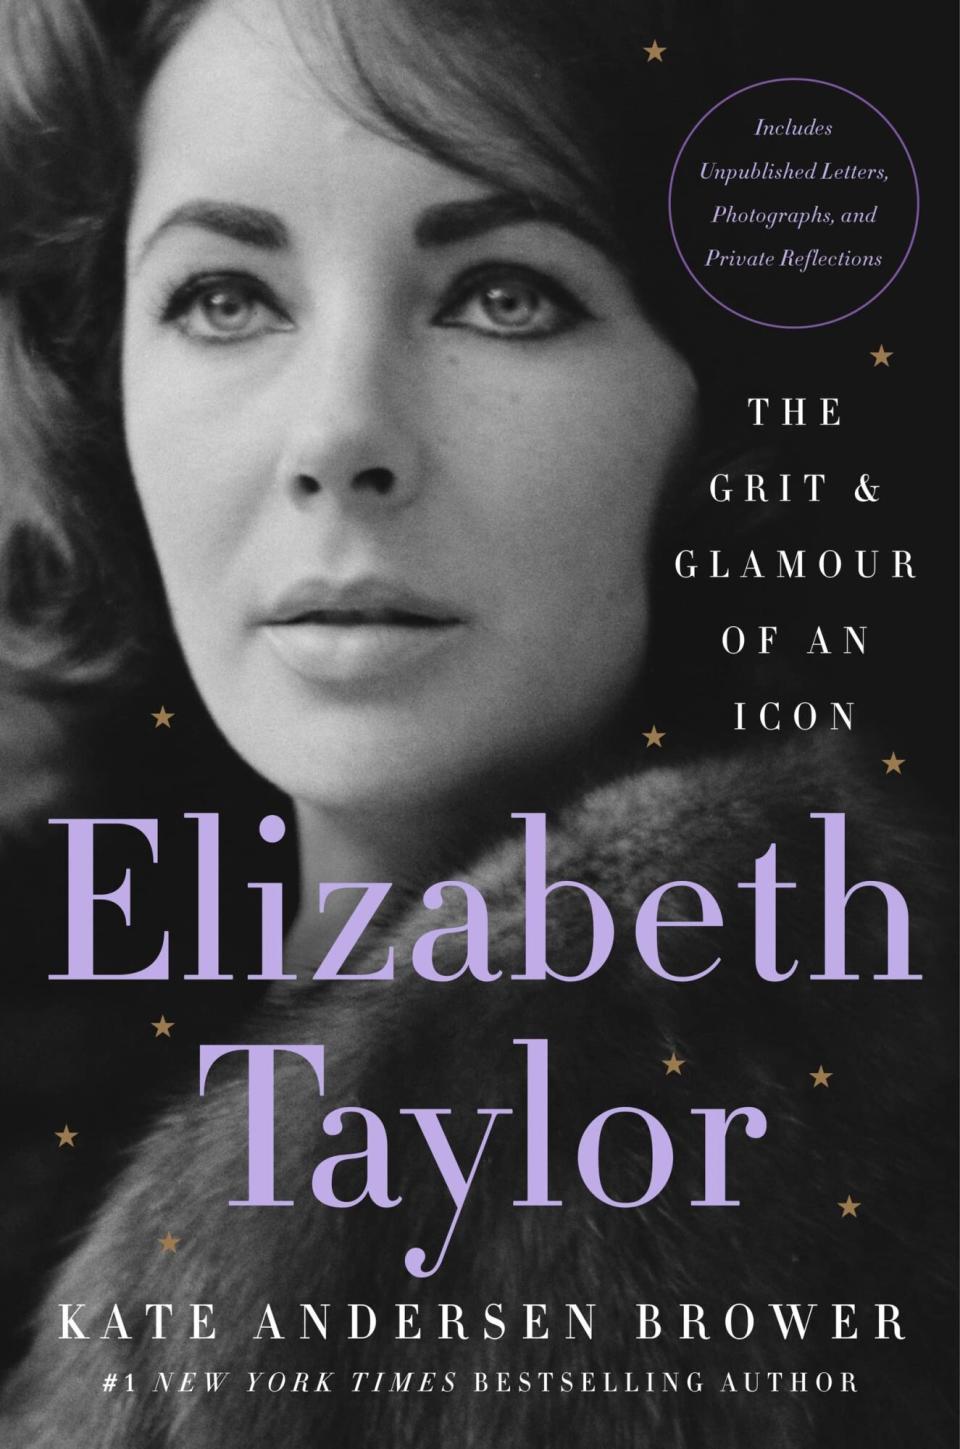 Elizabeth taylor: the grit and glamour of an icon by Kate Brower